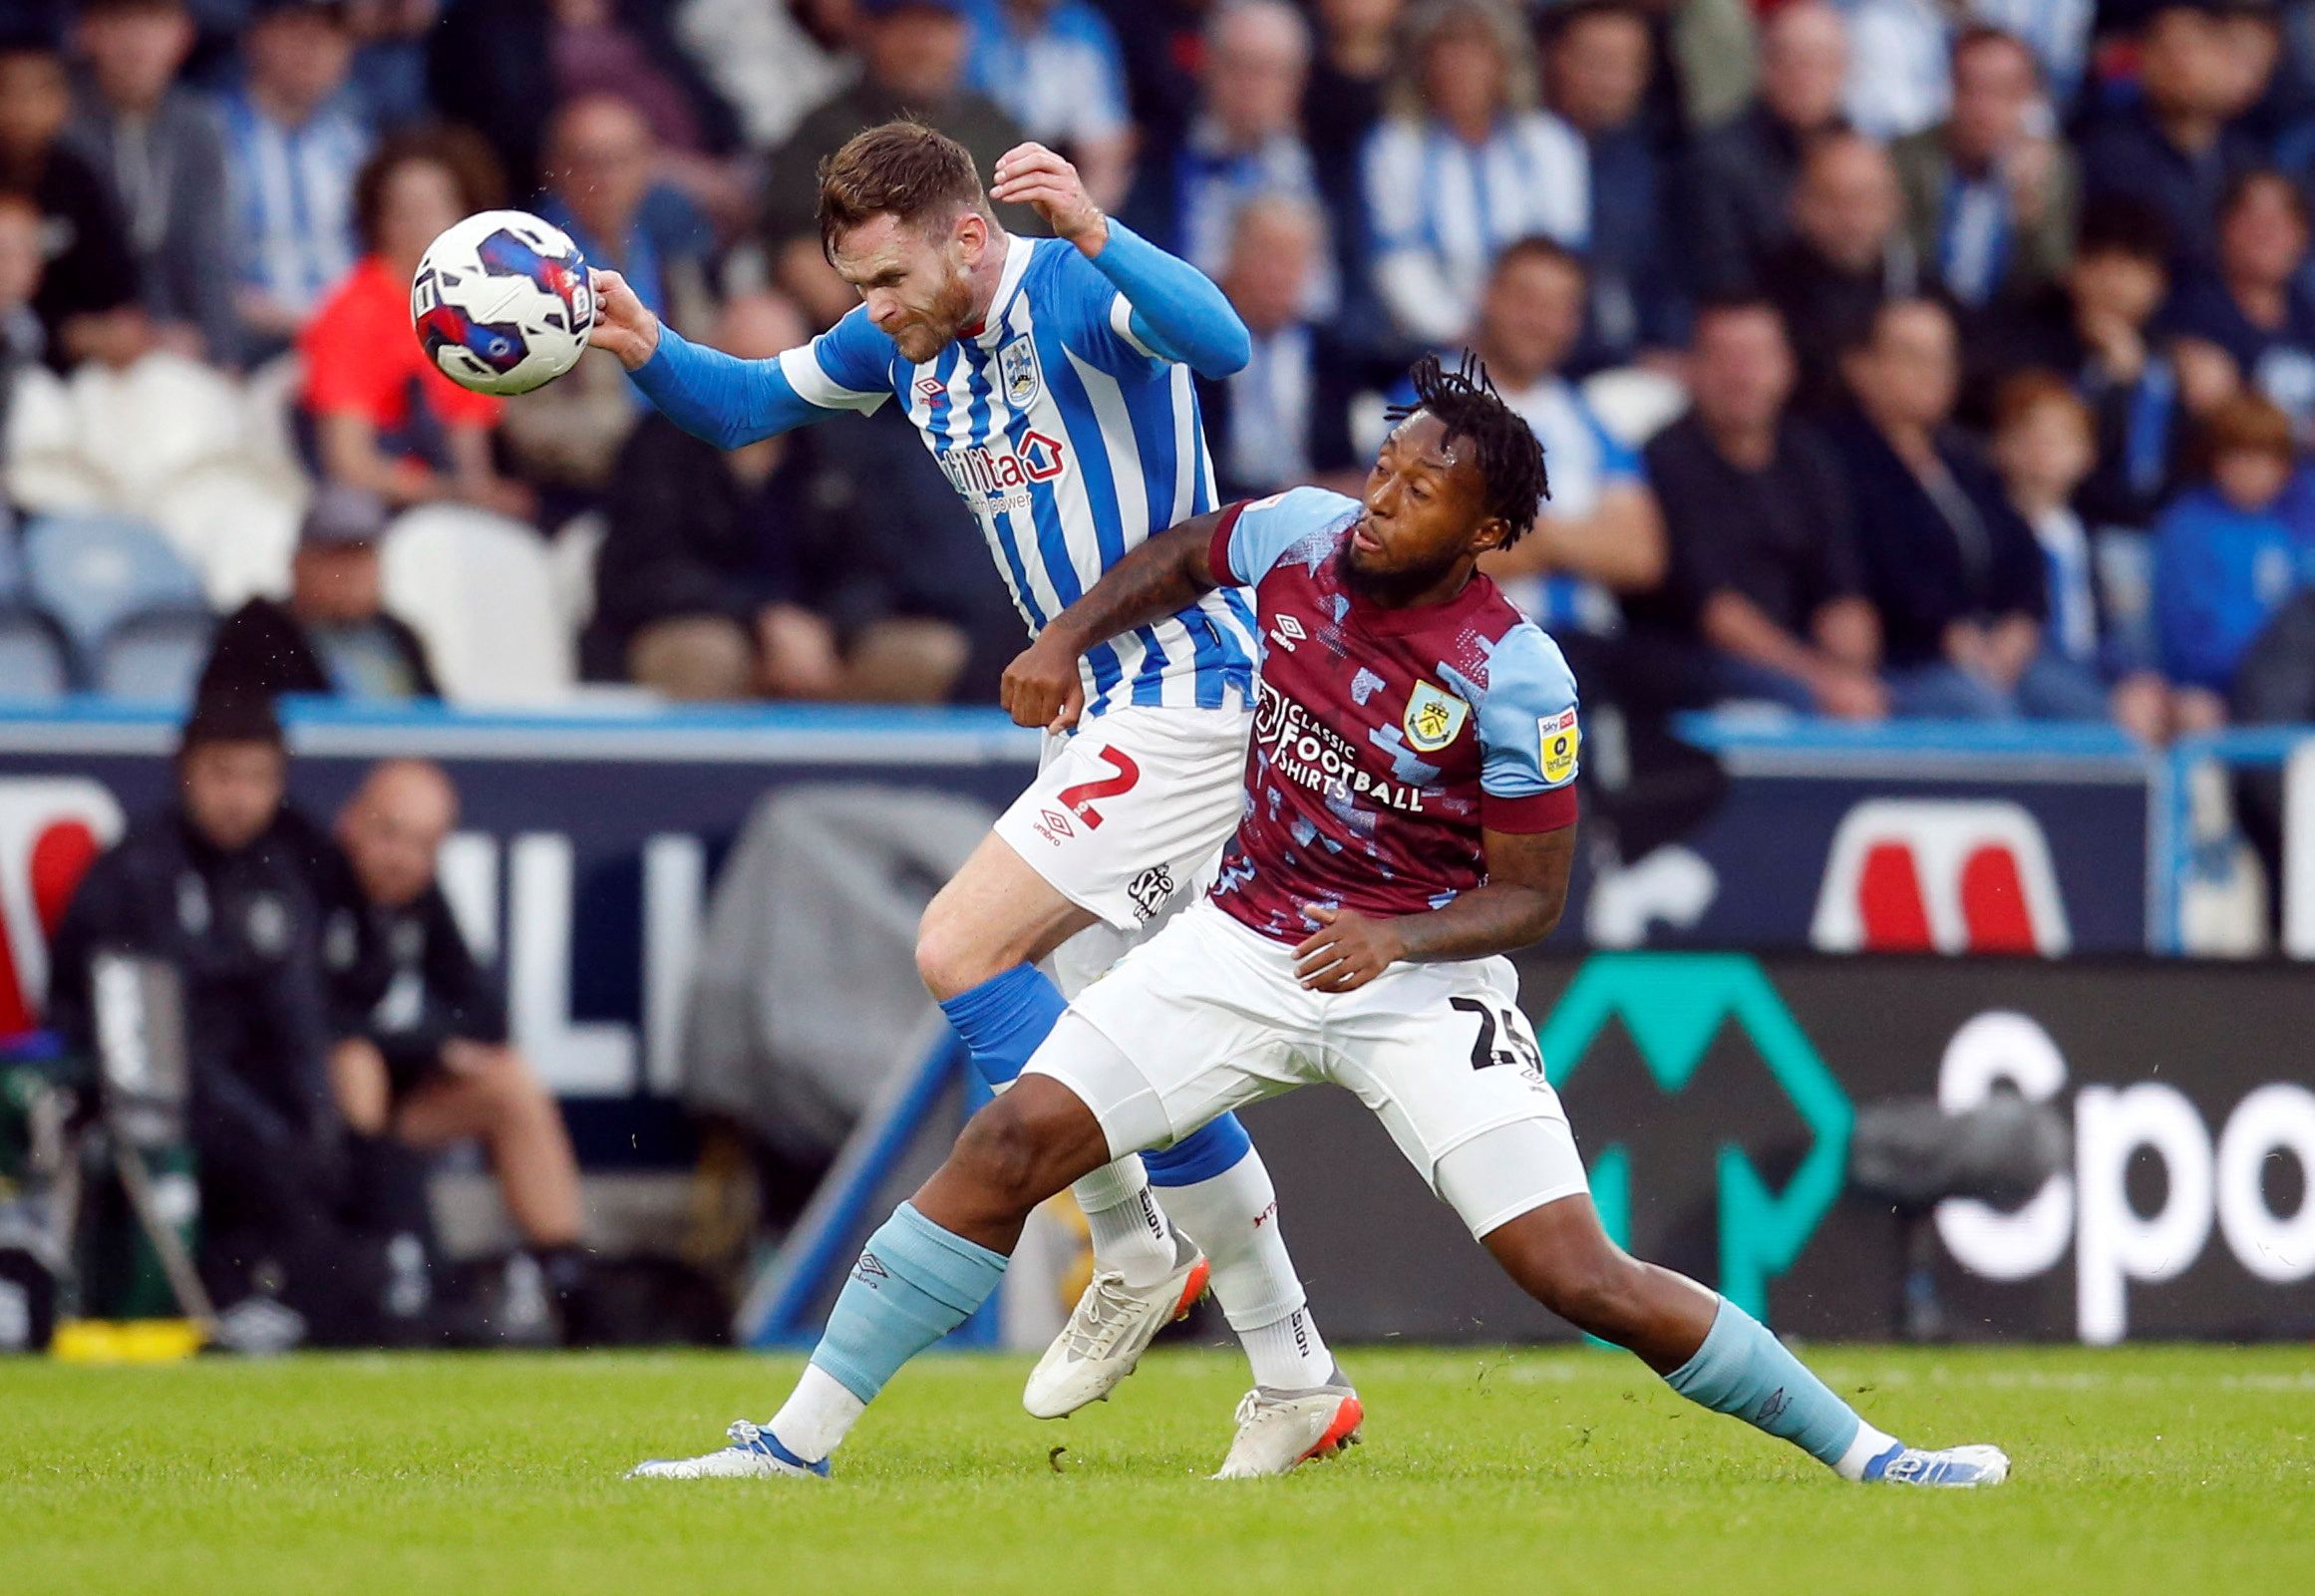 Soccer Football - Championship - Huddersfield Town v Burnley - John Smith's Stadium, Huddersfield, Britain - July 29, 2022  Huddersfield Town's Ollie Turton in action with Burnley's Samuel Bastien  Action Images/Ed Sykes  EDITORIAL USE ONLY. No use with unauthorized audio, video, data, fixture lists, club/league logos or 